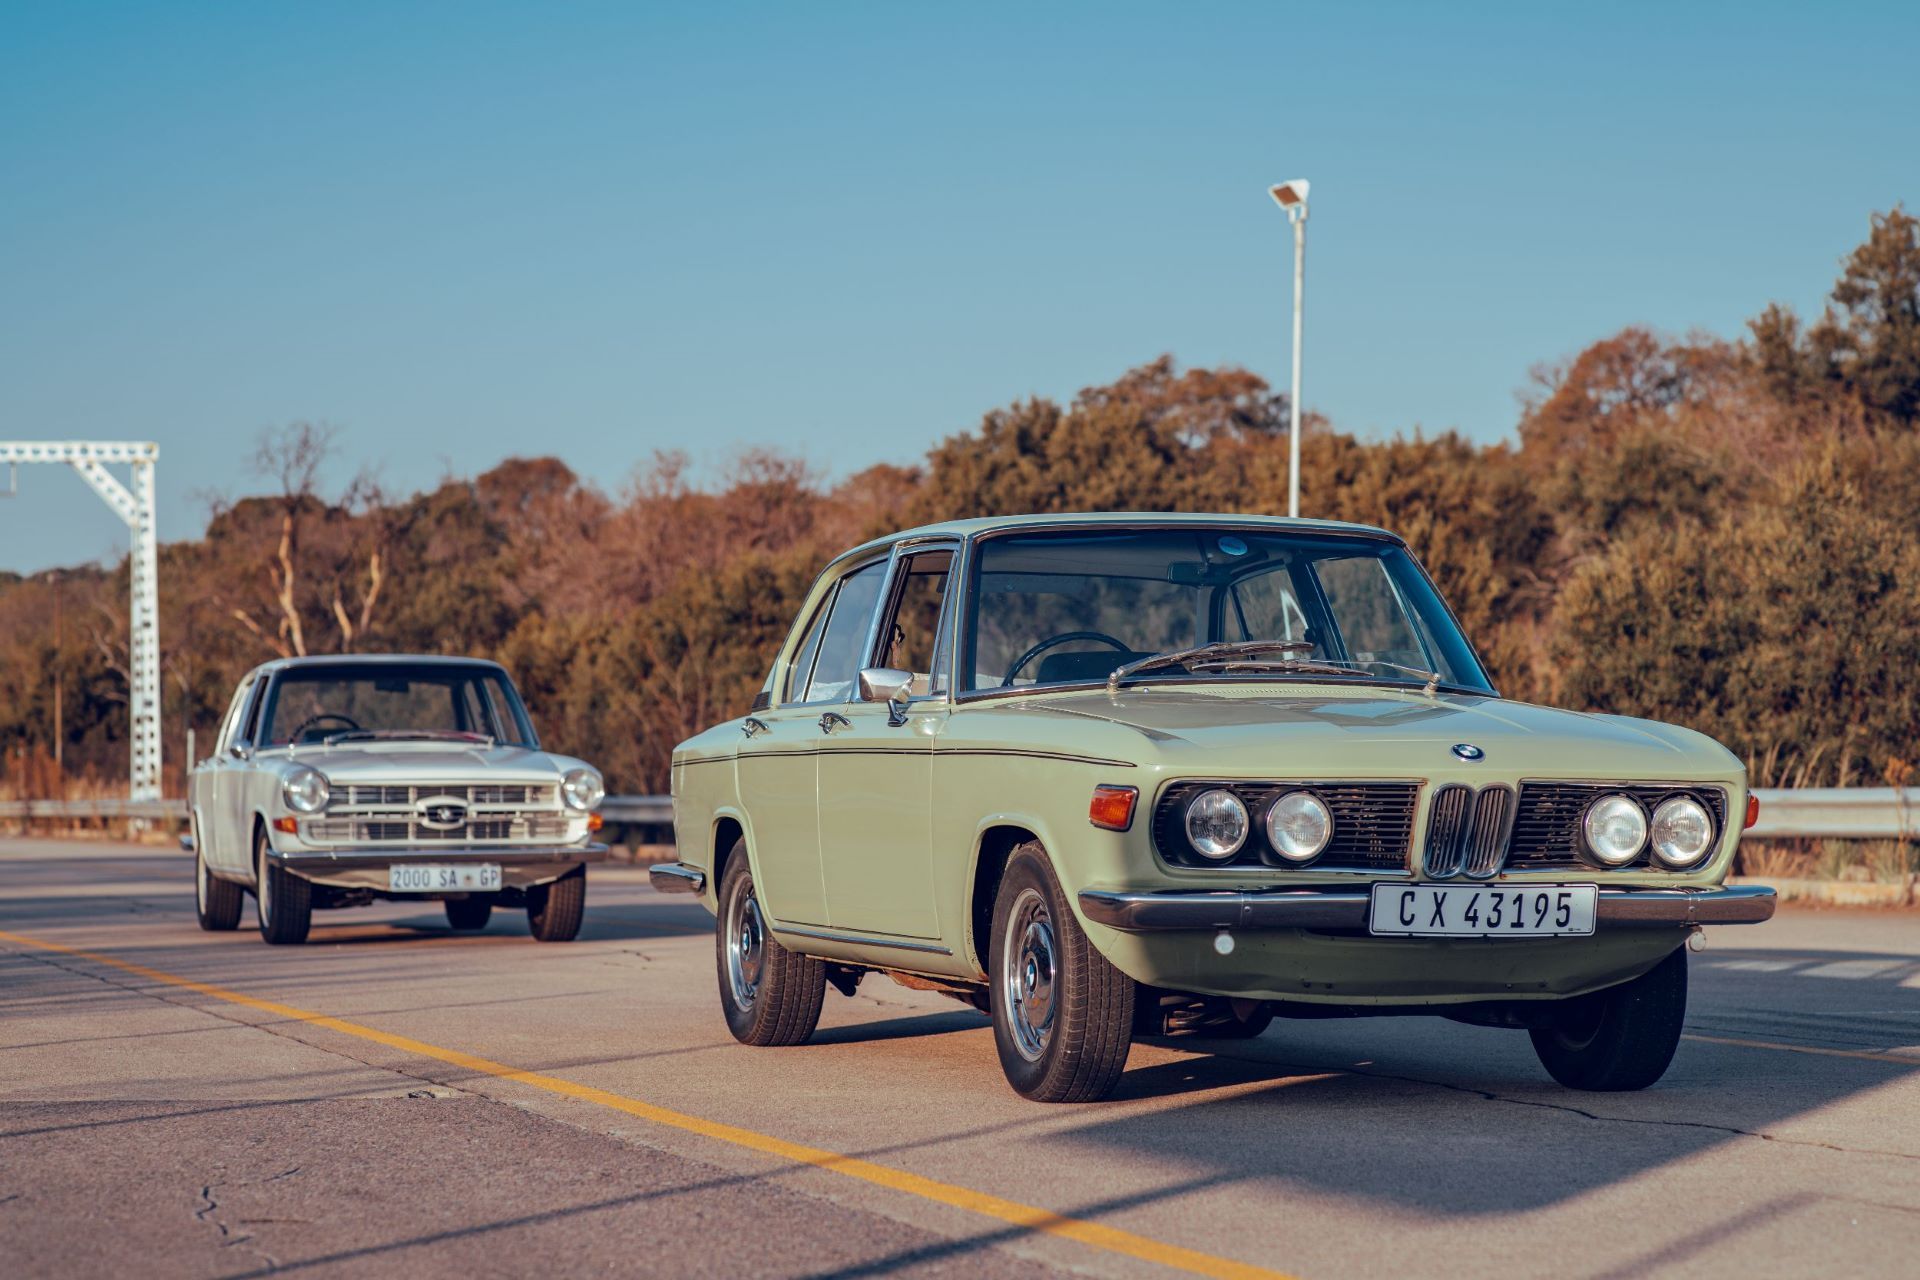 Cars.co.za and BMW Group SA join forces to produce the official BMW SA 50th Anniversary Video Chronicles